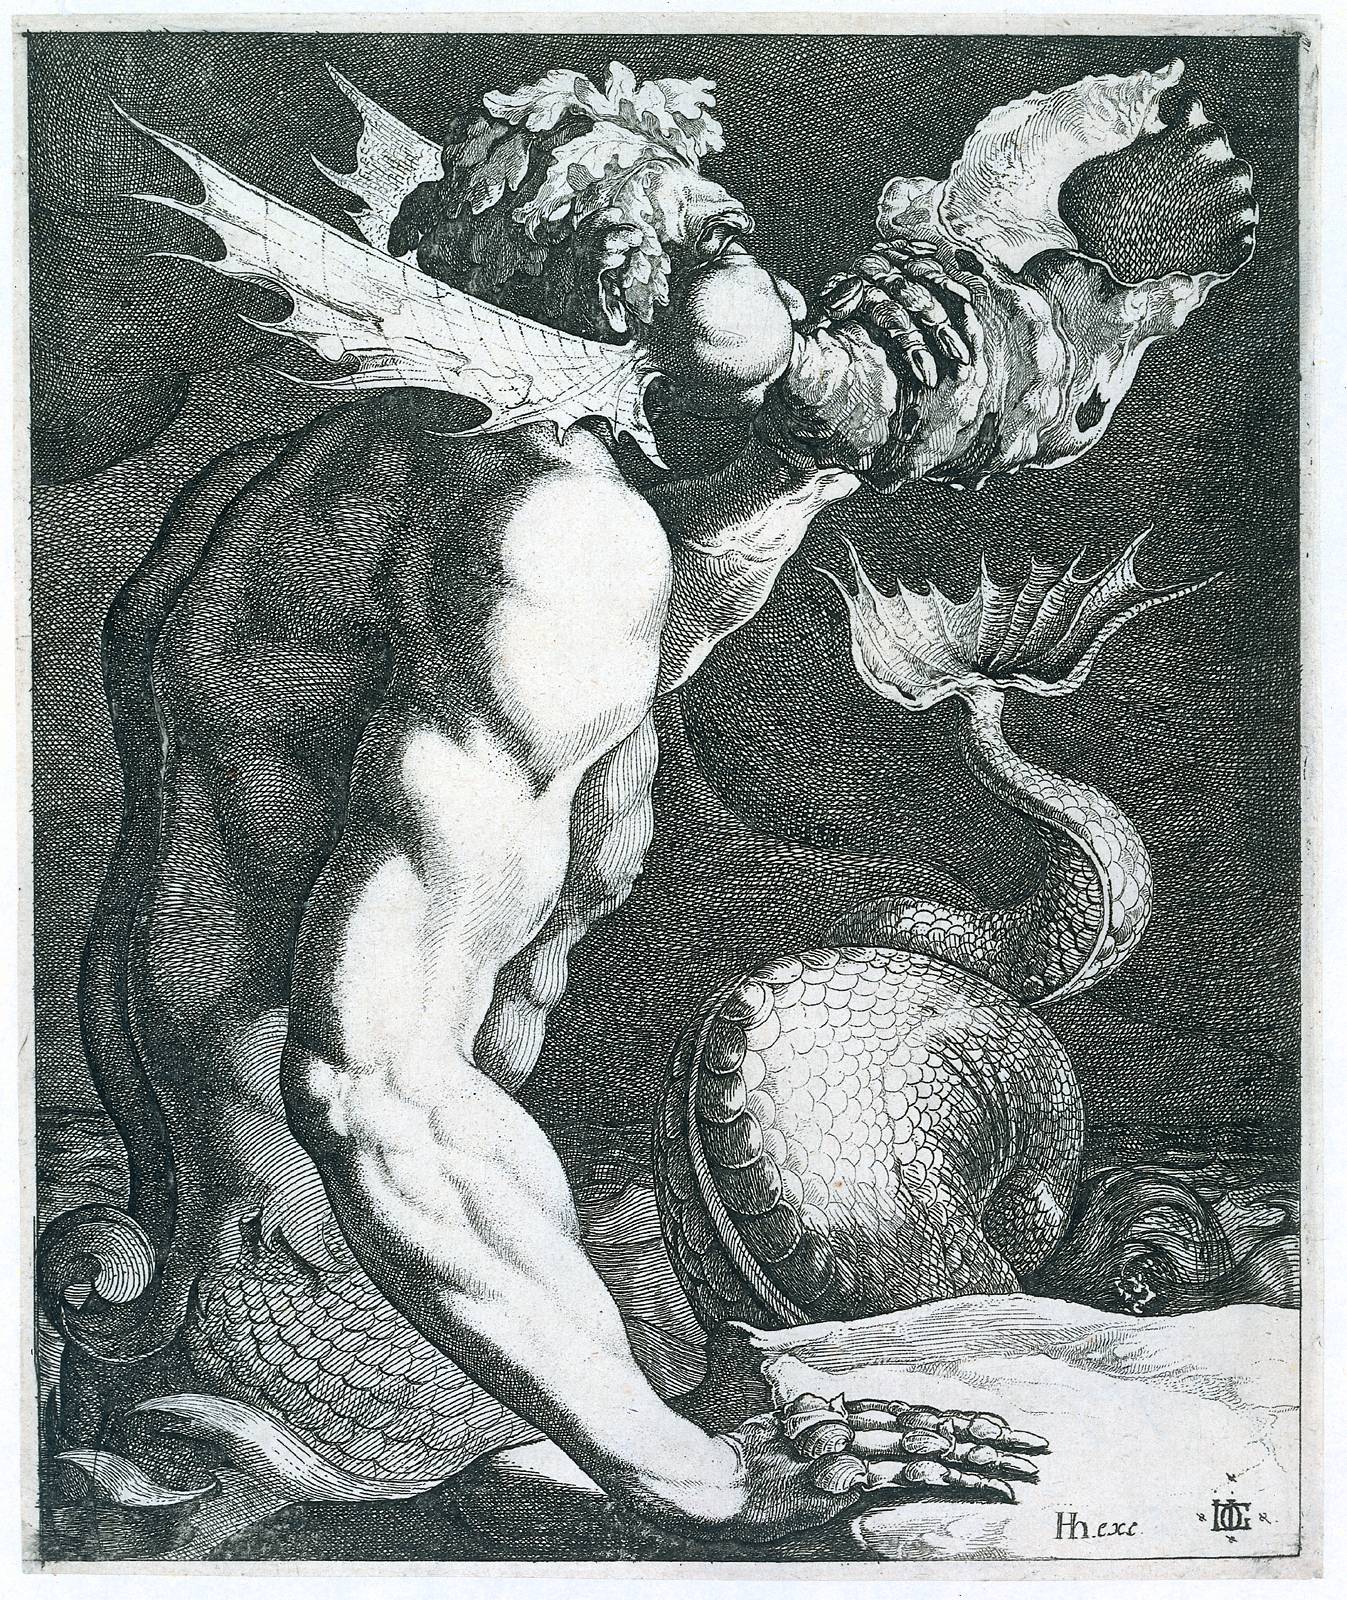 An illustration depicts Triton the mythical sea creature blowing into a conch shell.